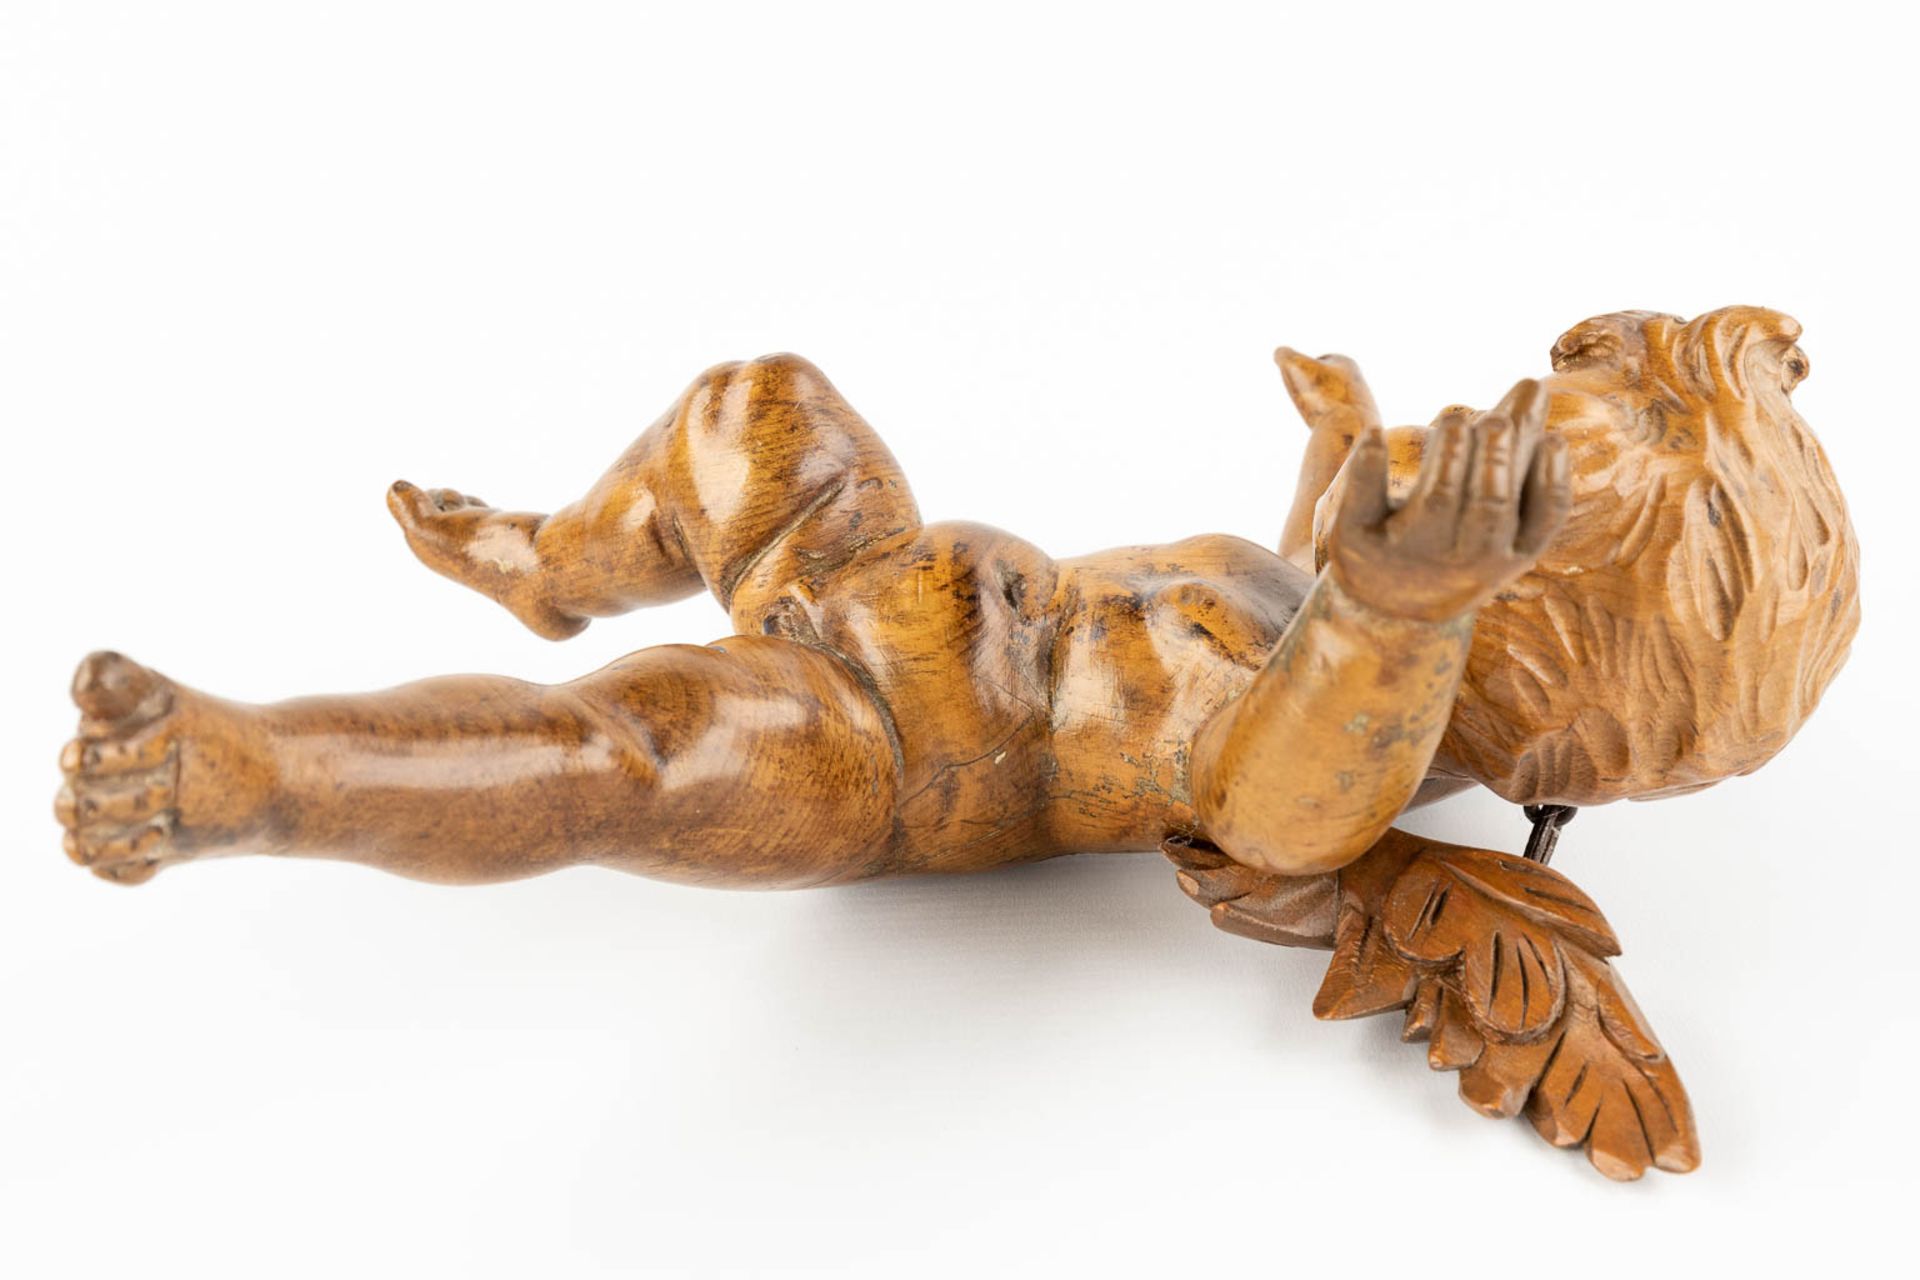 A pair of wood-sculptured putti, basswood, 18th C. (W:22 x H:30 cm) - Image 13 of 14